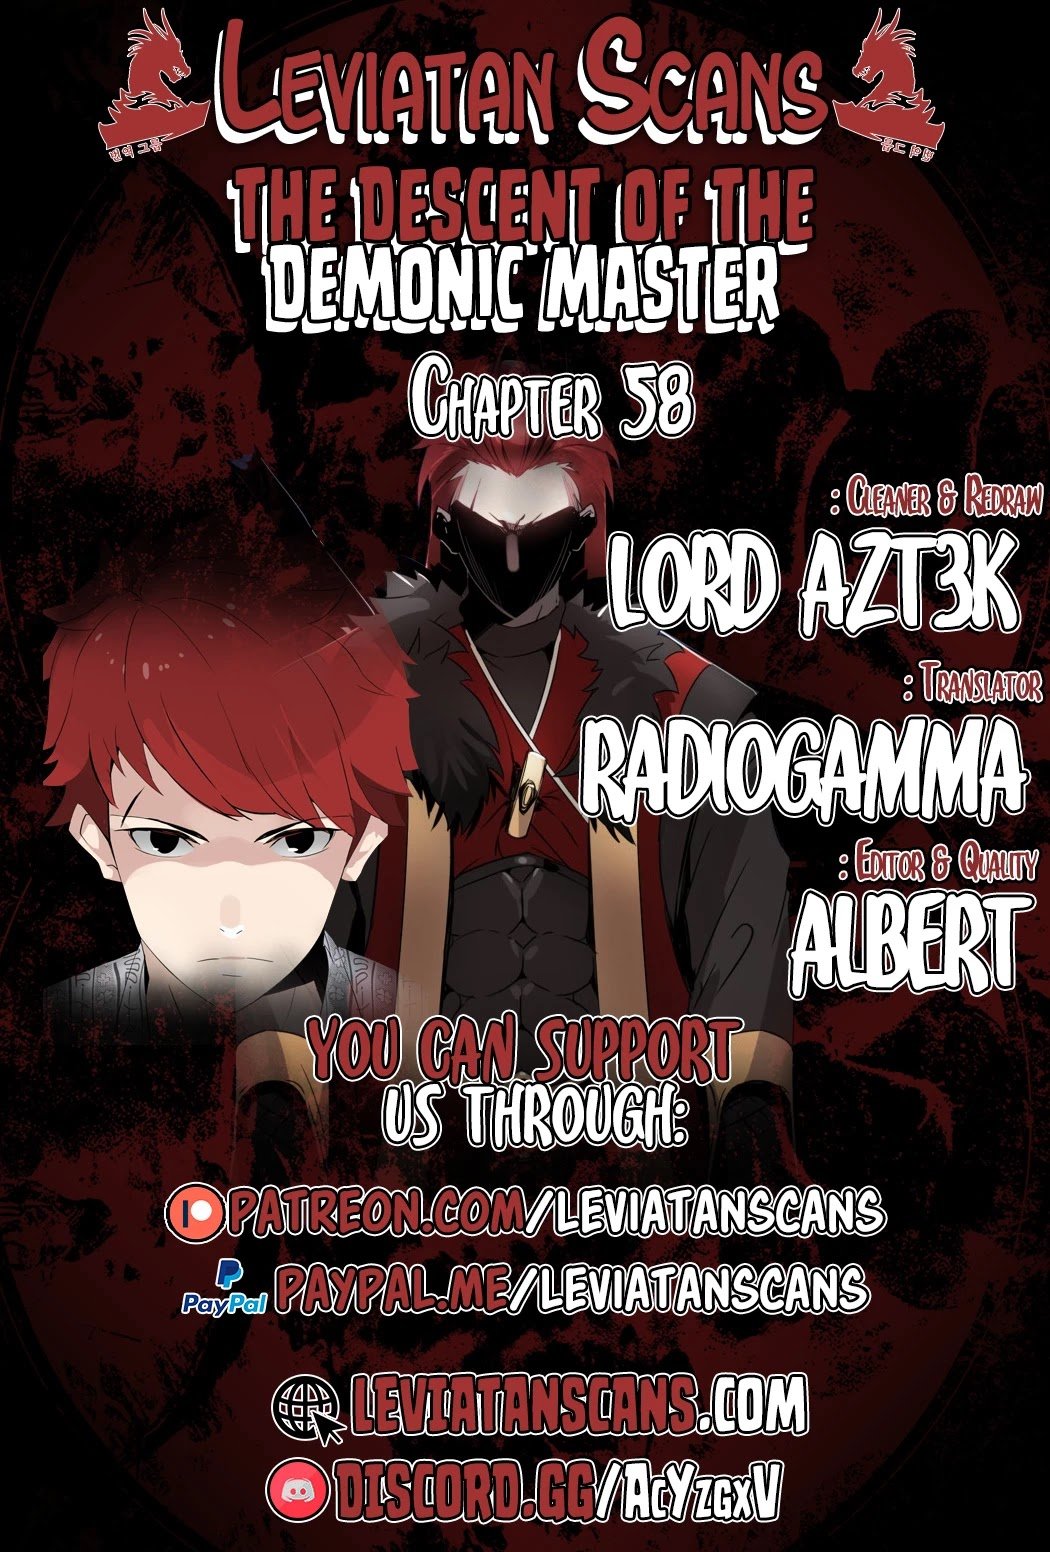 The Descent of the Demonic Master 58 01